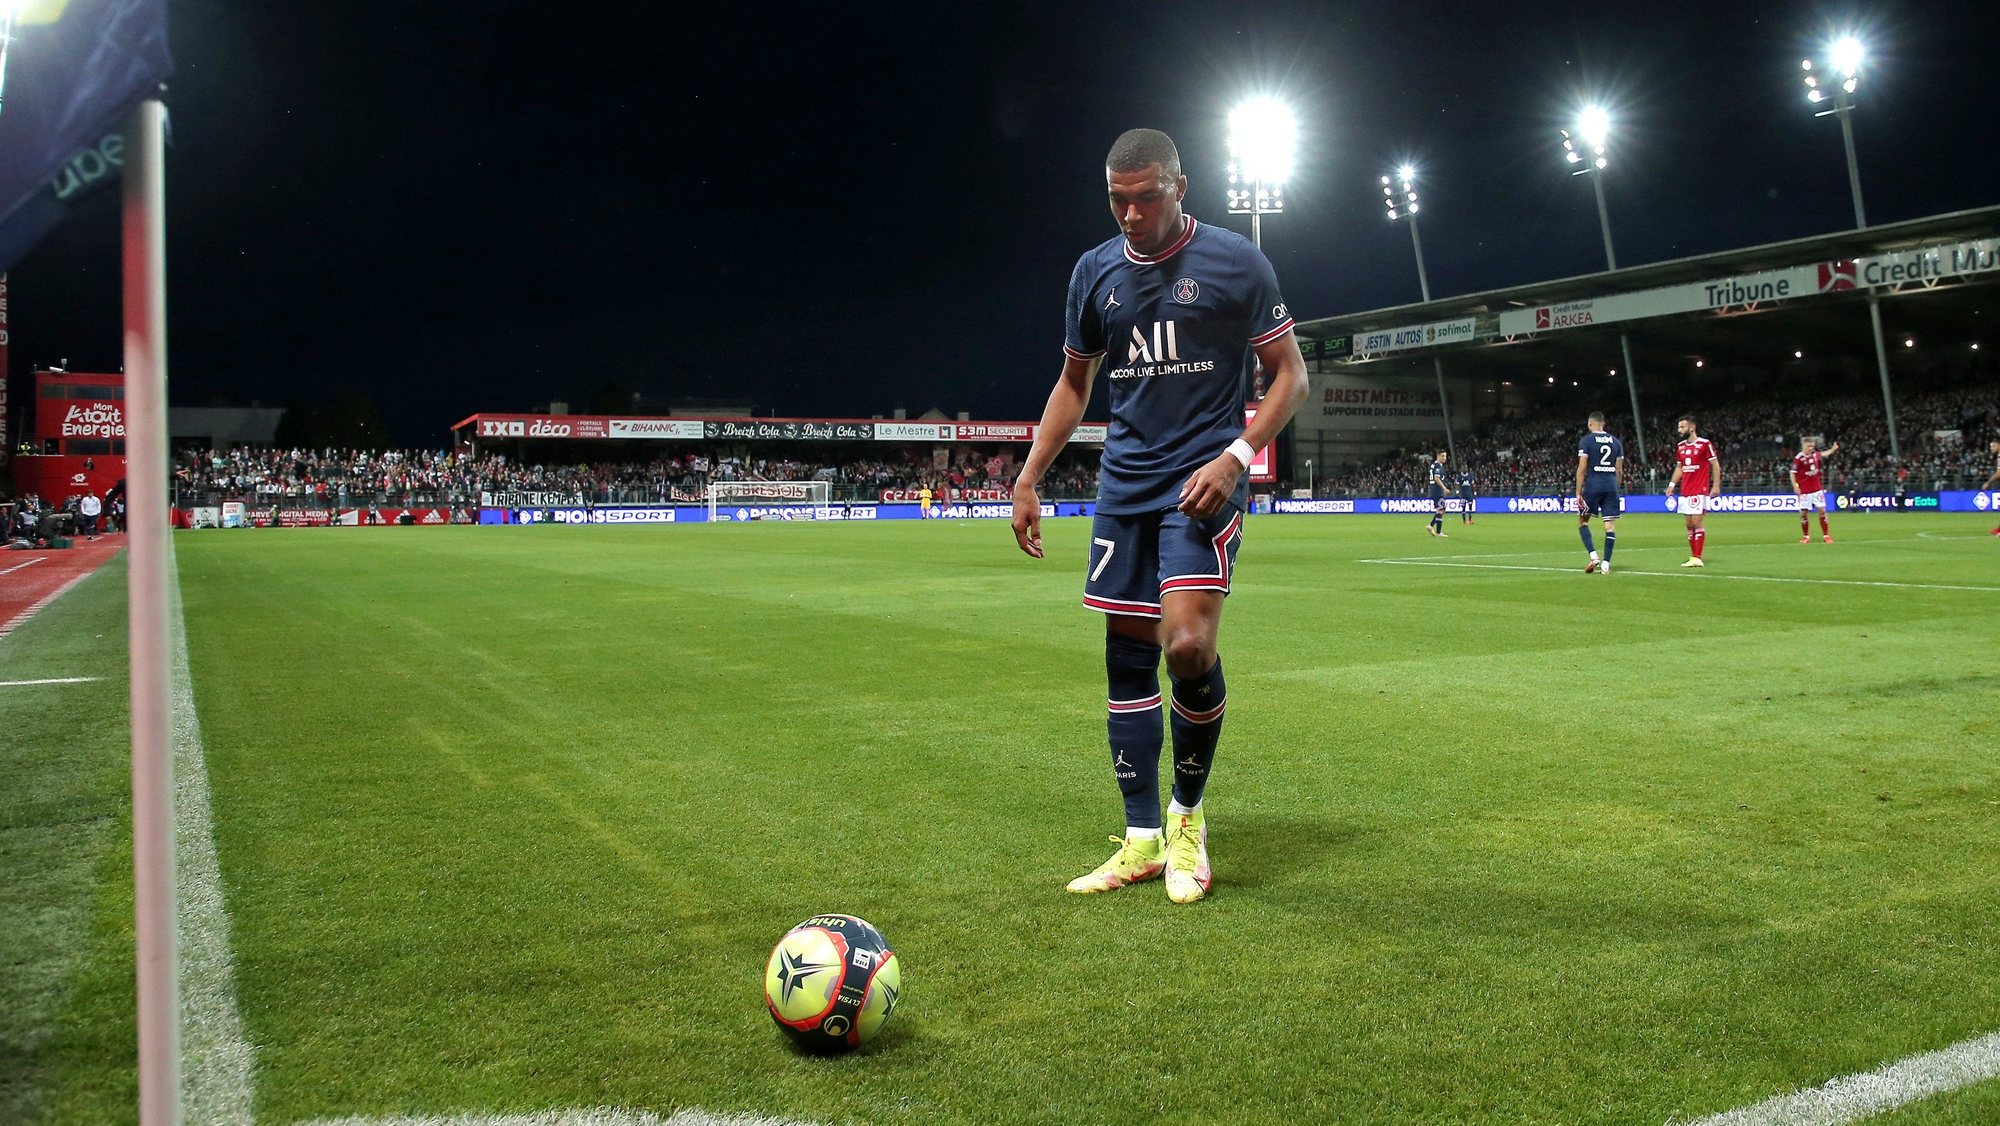 epa09422499 Paris Saint Germain&#039;s Kylian Mbappe in action during the French Ligue 1 soccer match between Paris Saint Germain and the Stade Brestois in Brest, France, 20 August 2021.  EPA/Christophe Petit Tesson